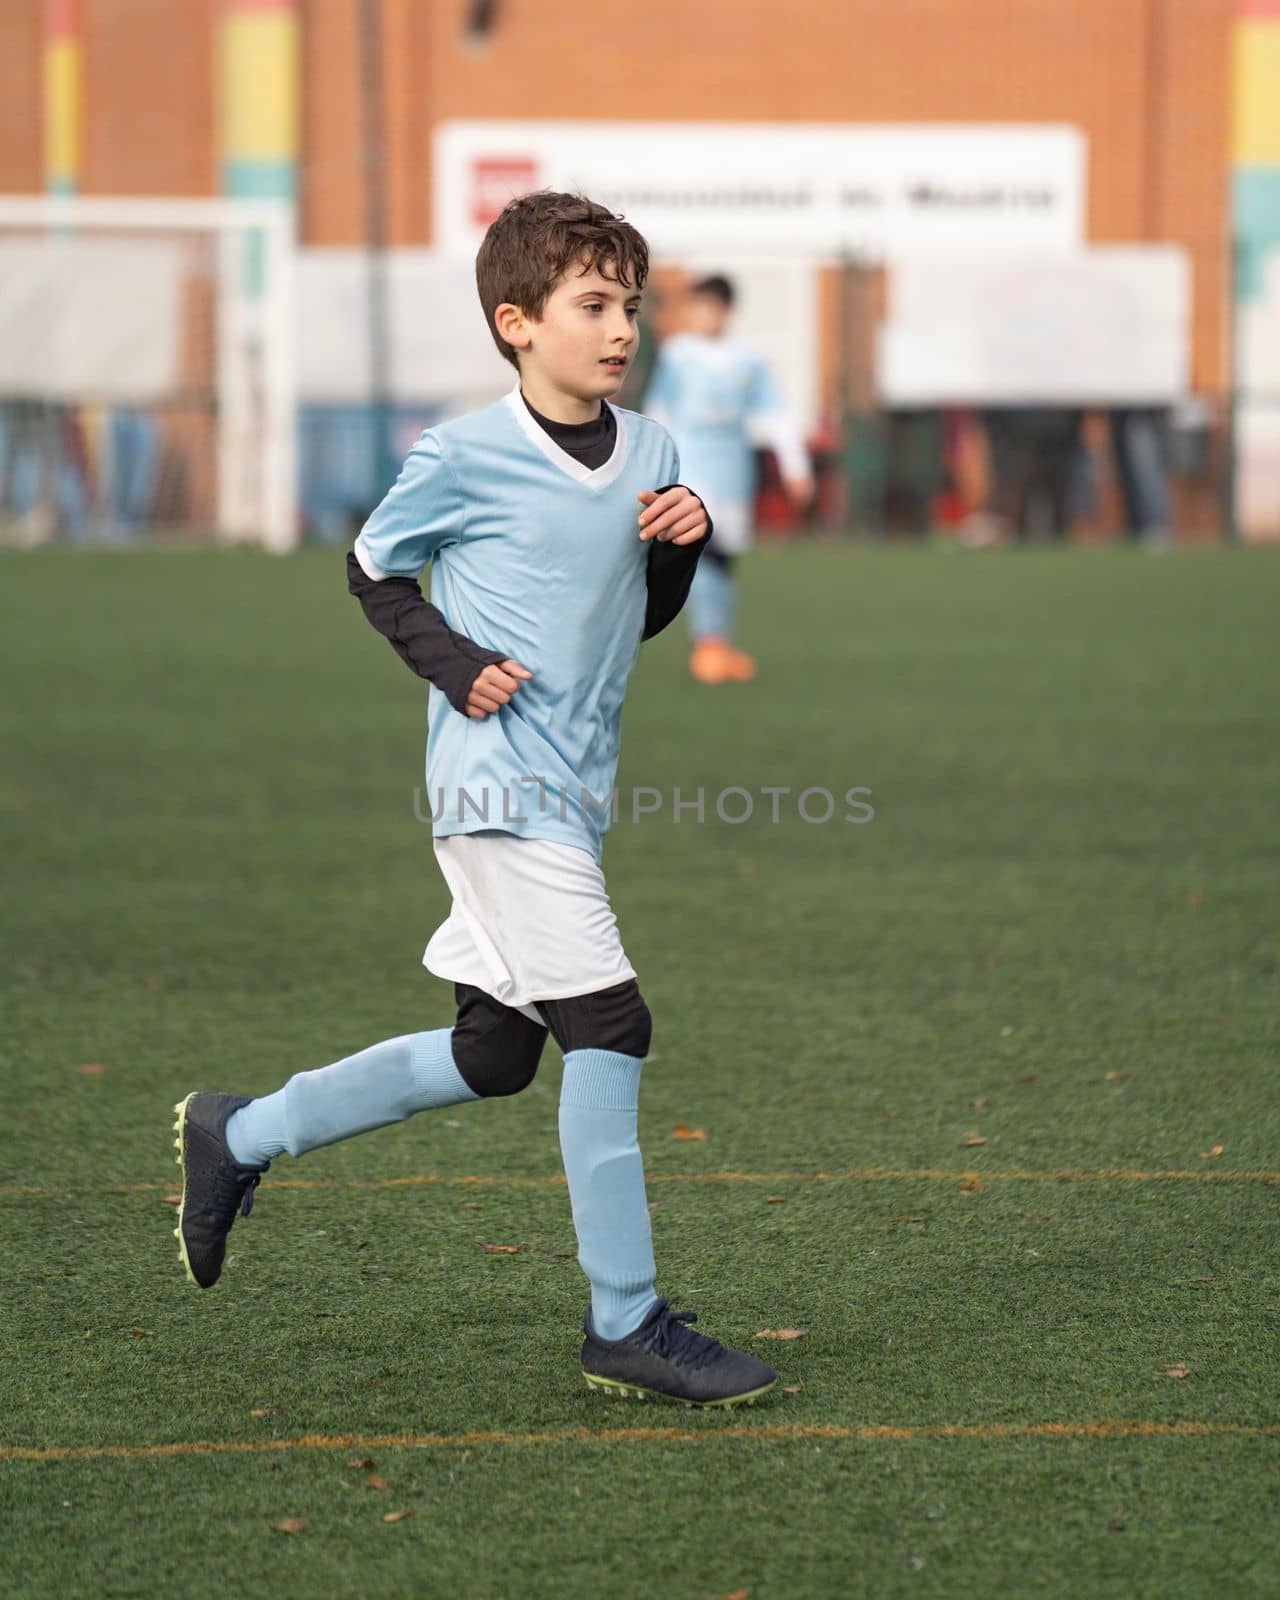 Portrait of young boy play on the grass football field in the stadium during a match in cold weather.